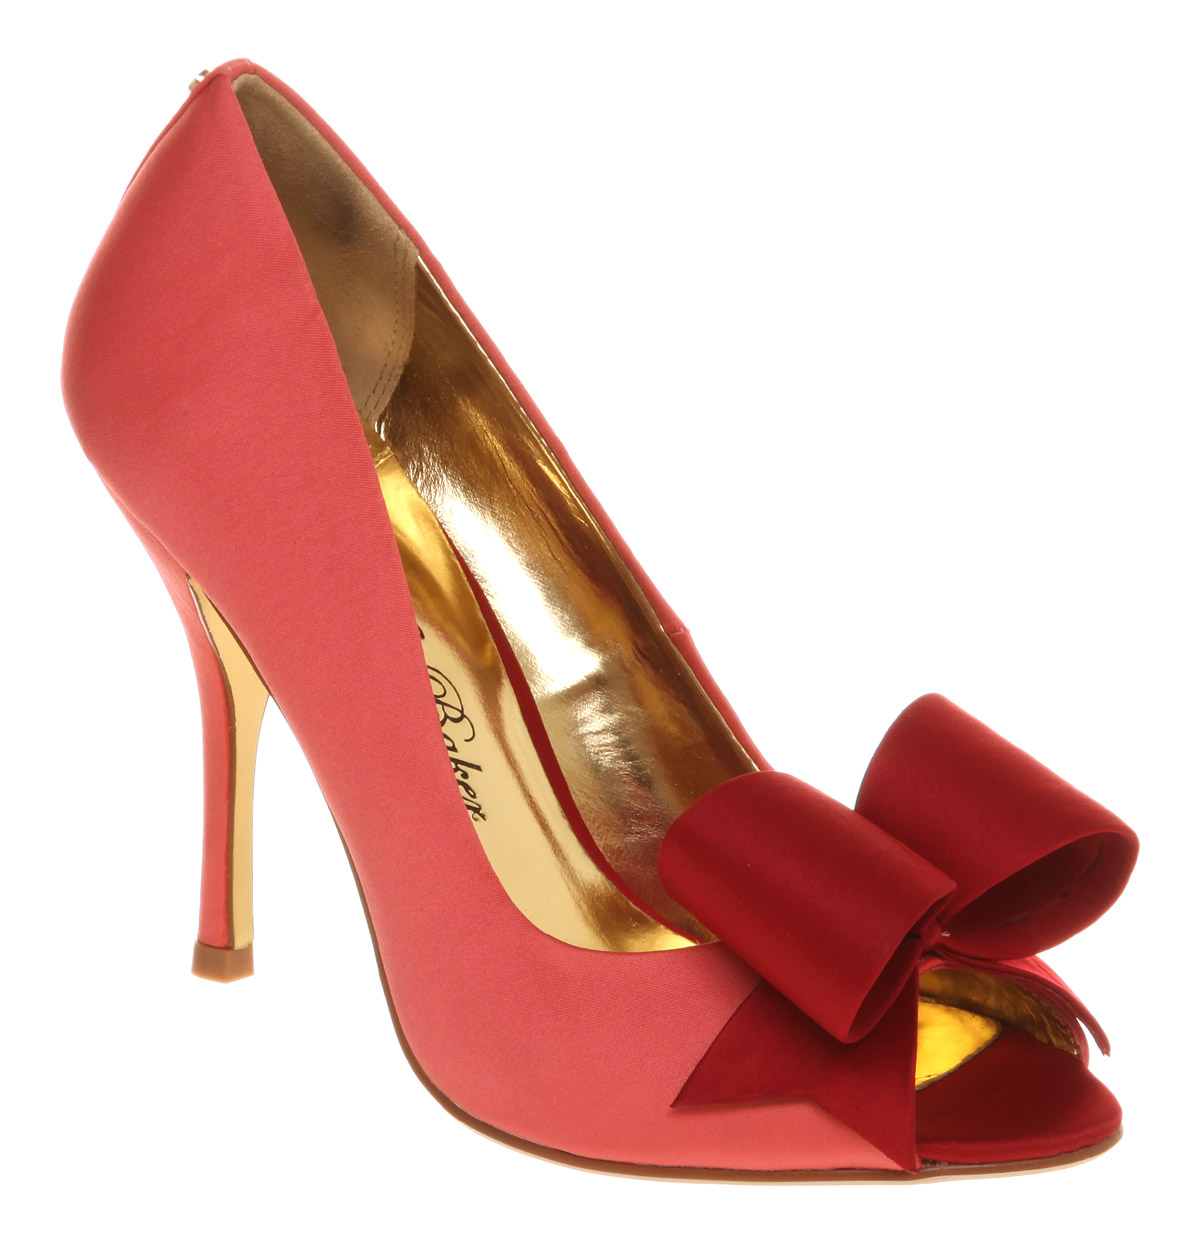 Lyst - Ted baker Peep Toe Court Shoe in Pink